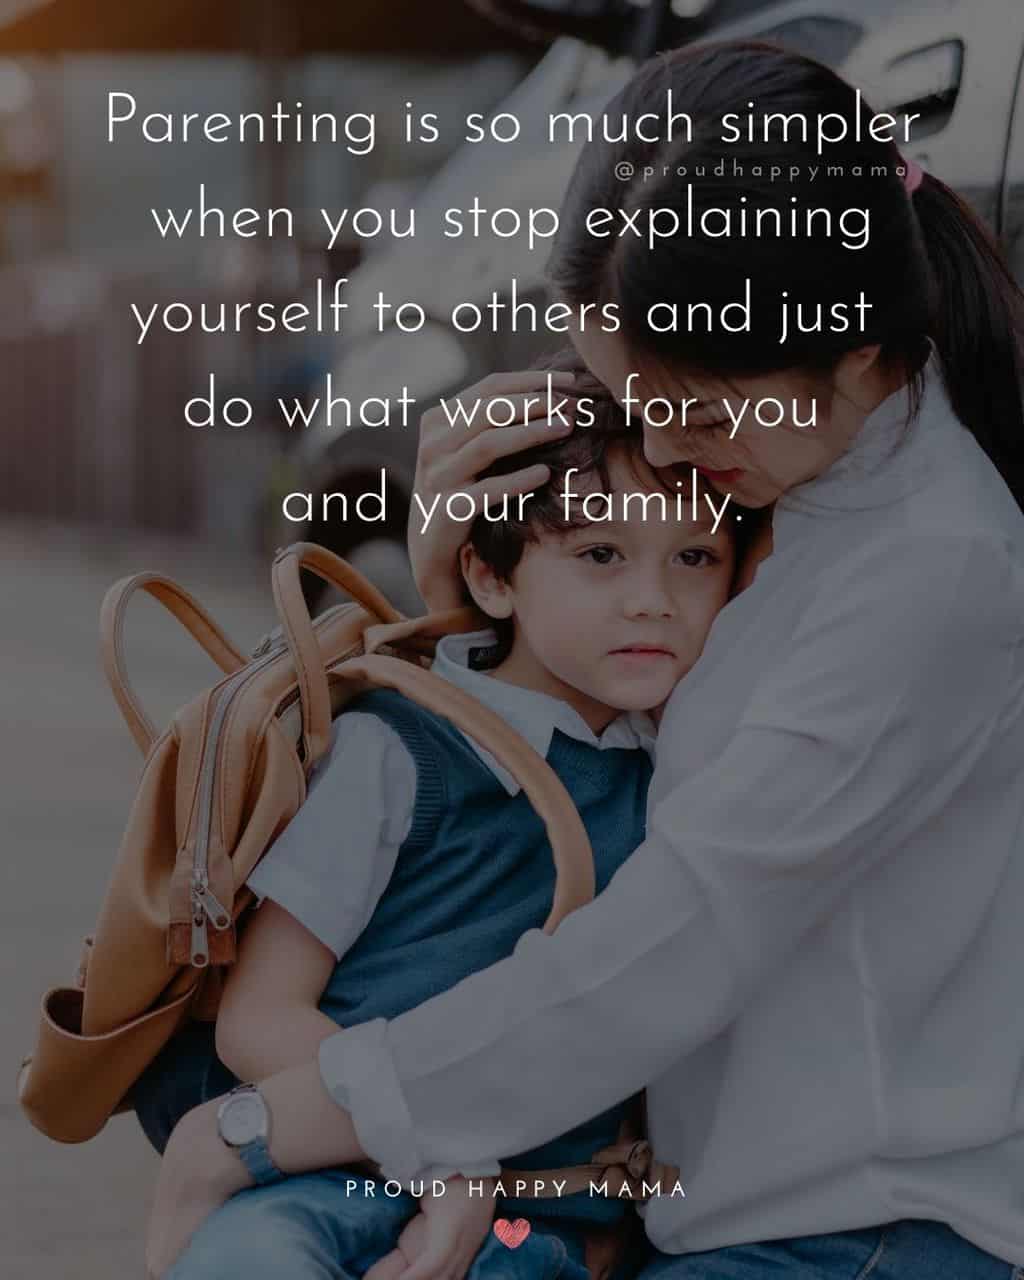 Parenting Quotes - Parenting is so much simpler when you stop explaining yourself to others and just do what works for you and your